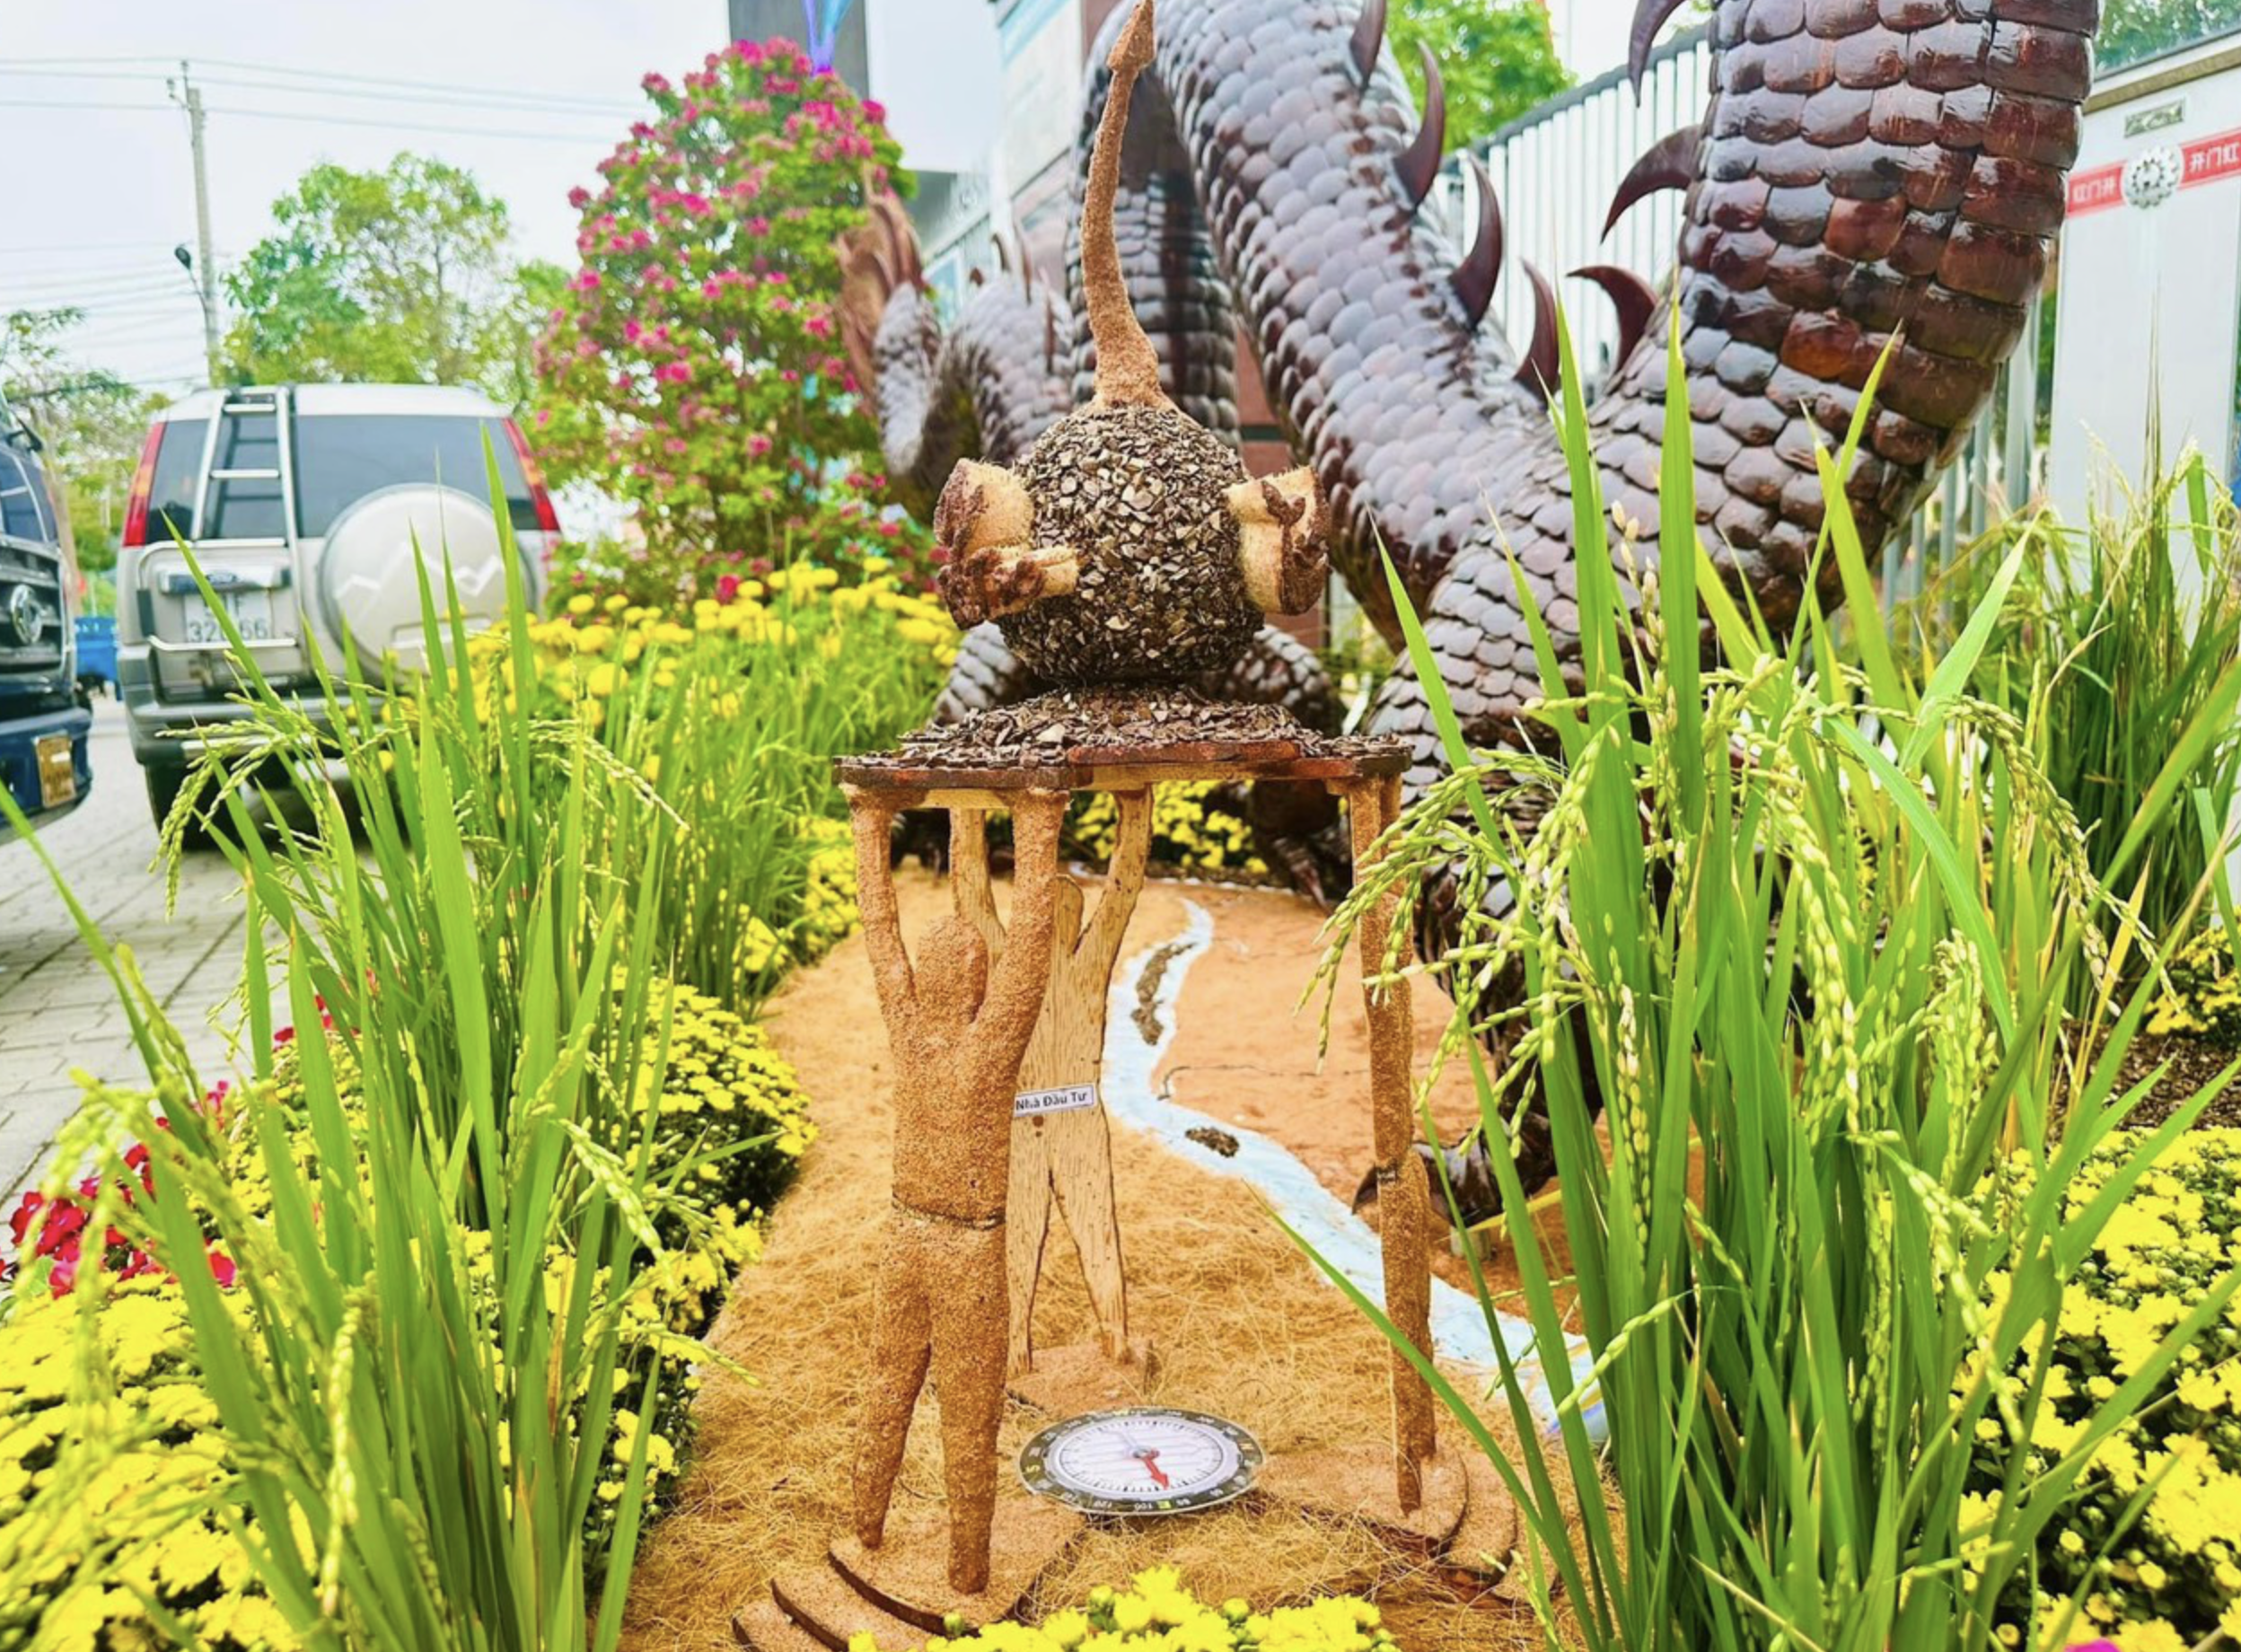 Rice plants, chrysanthemum and coconut flowers were used to decorate the location where a dragon mascot was placed in front of the headquarters of the BIDV branch on Dong Khoi Avenue in Ben Tre Province, southern Vietnam. Photo: Tuoi Tre